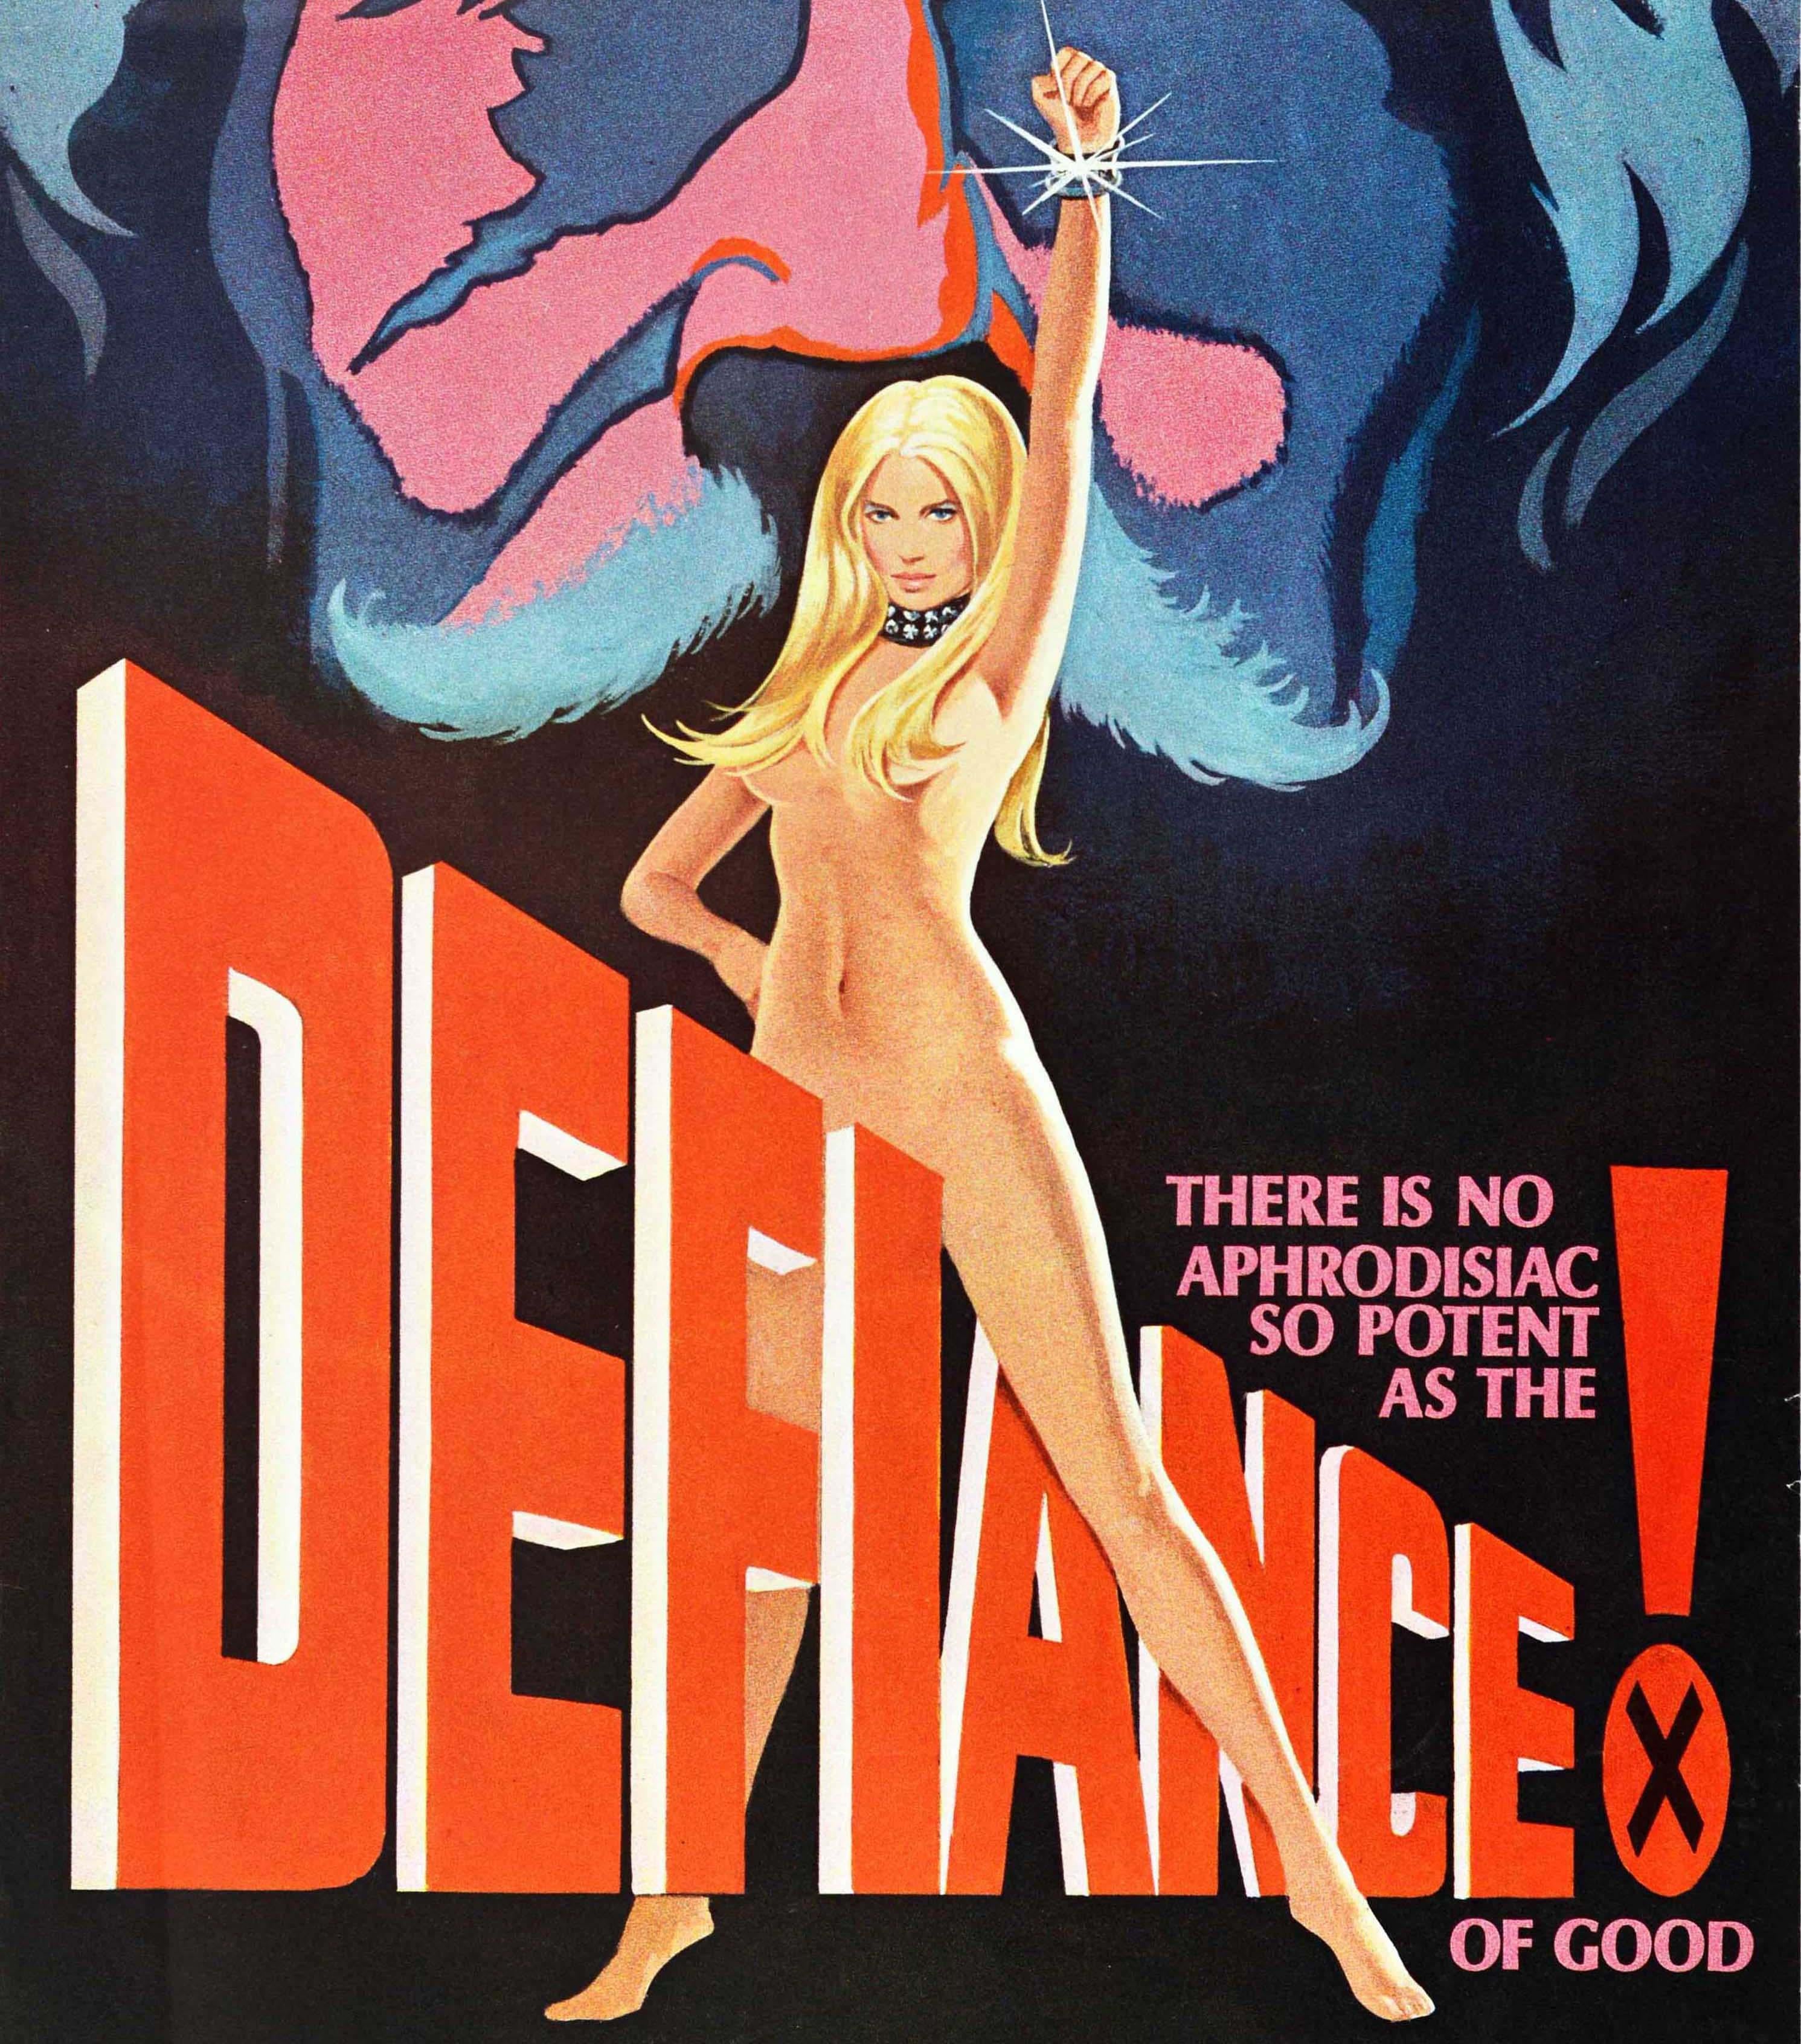 Original Vintage Cinema Poster Defiance Of Good Crime Horror Adult Armand Weston - Print by Unknown